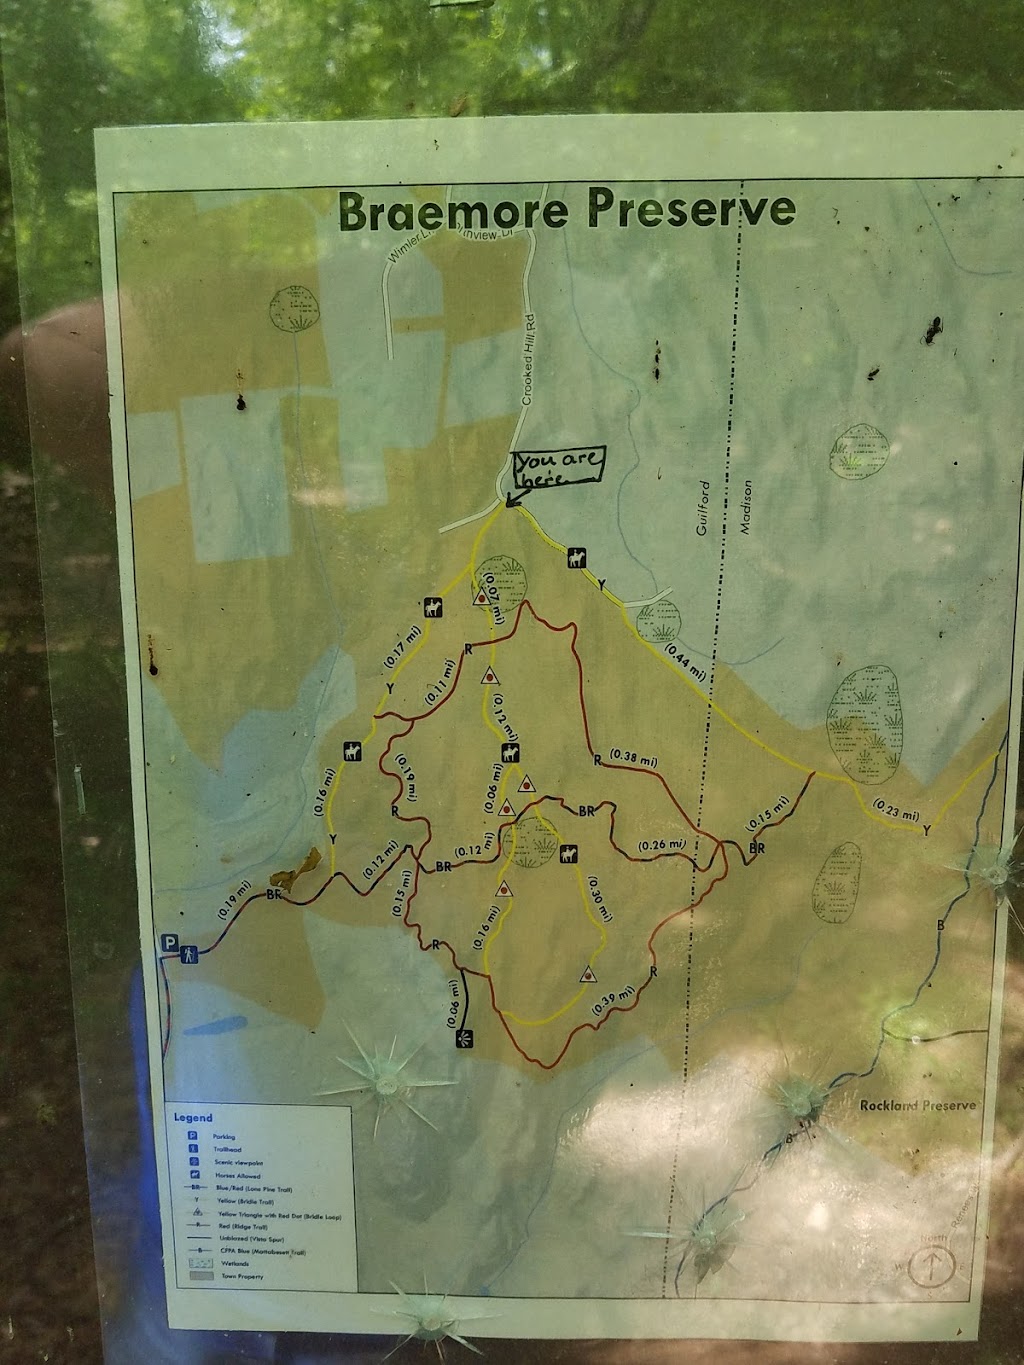 Braemore Trails upper lot | Guilford, CT 06437 | Phone: (203) 457-9253